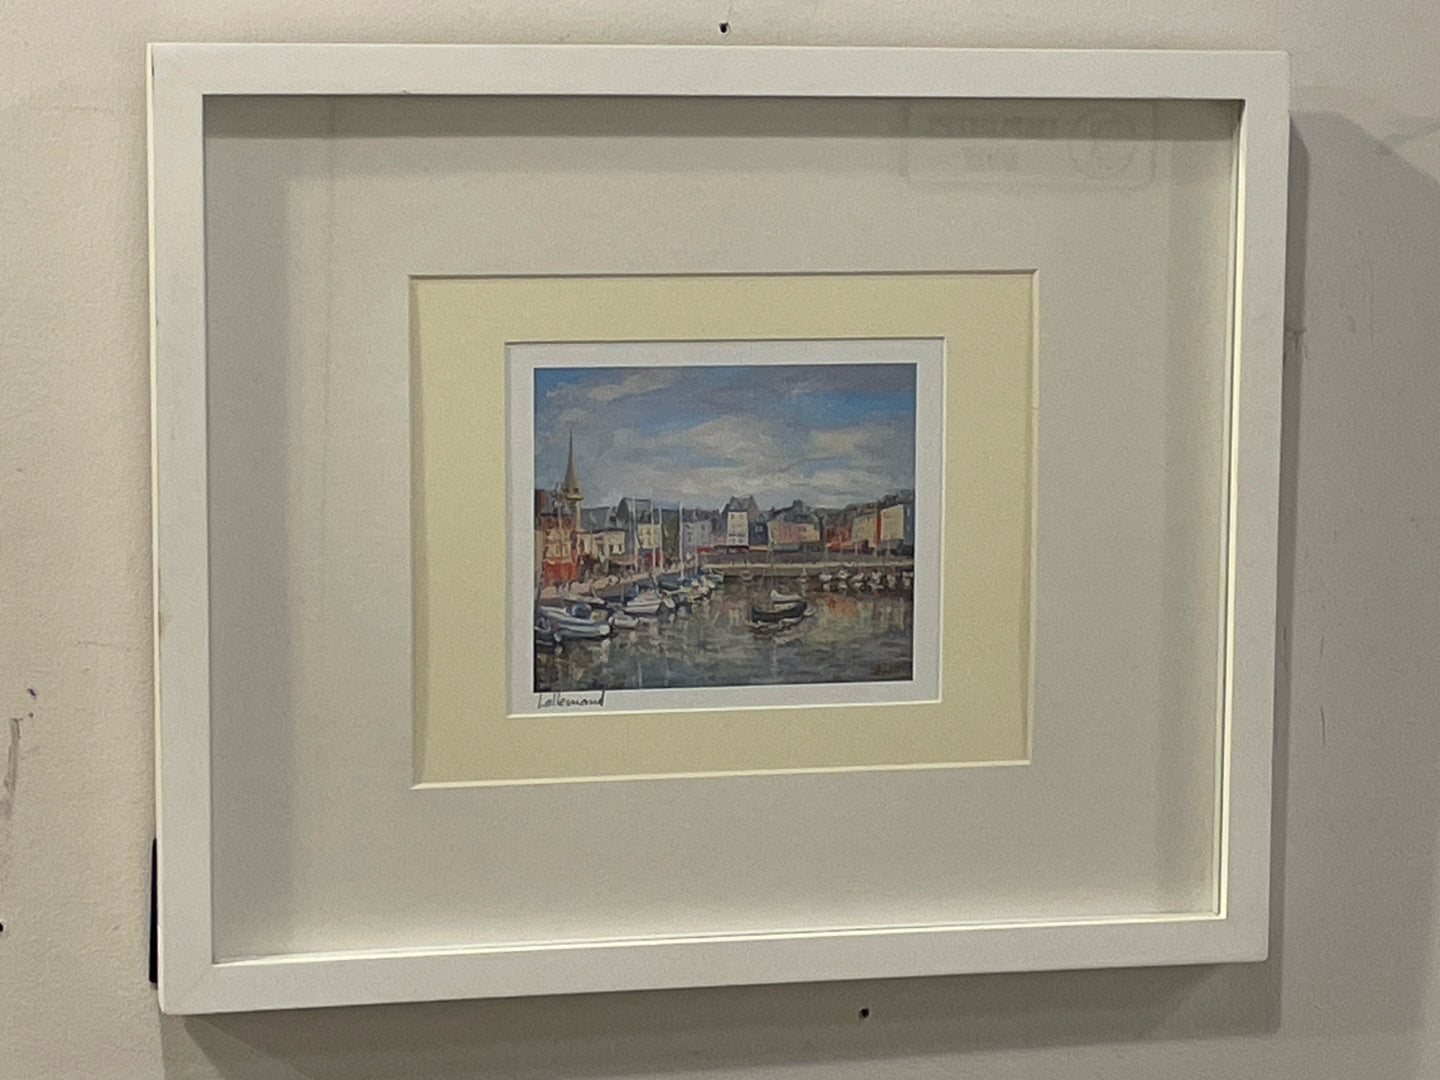 Harbor Scene Print, by Lallemand, signed